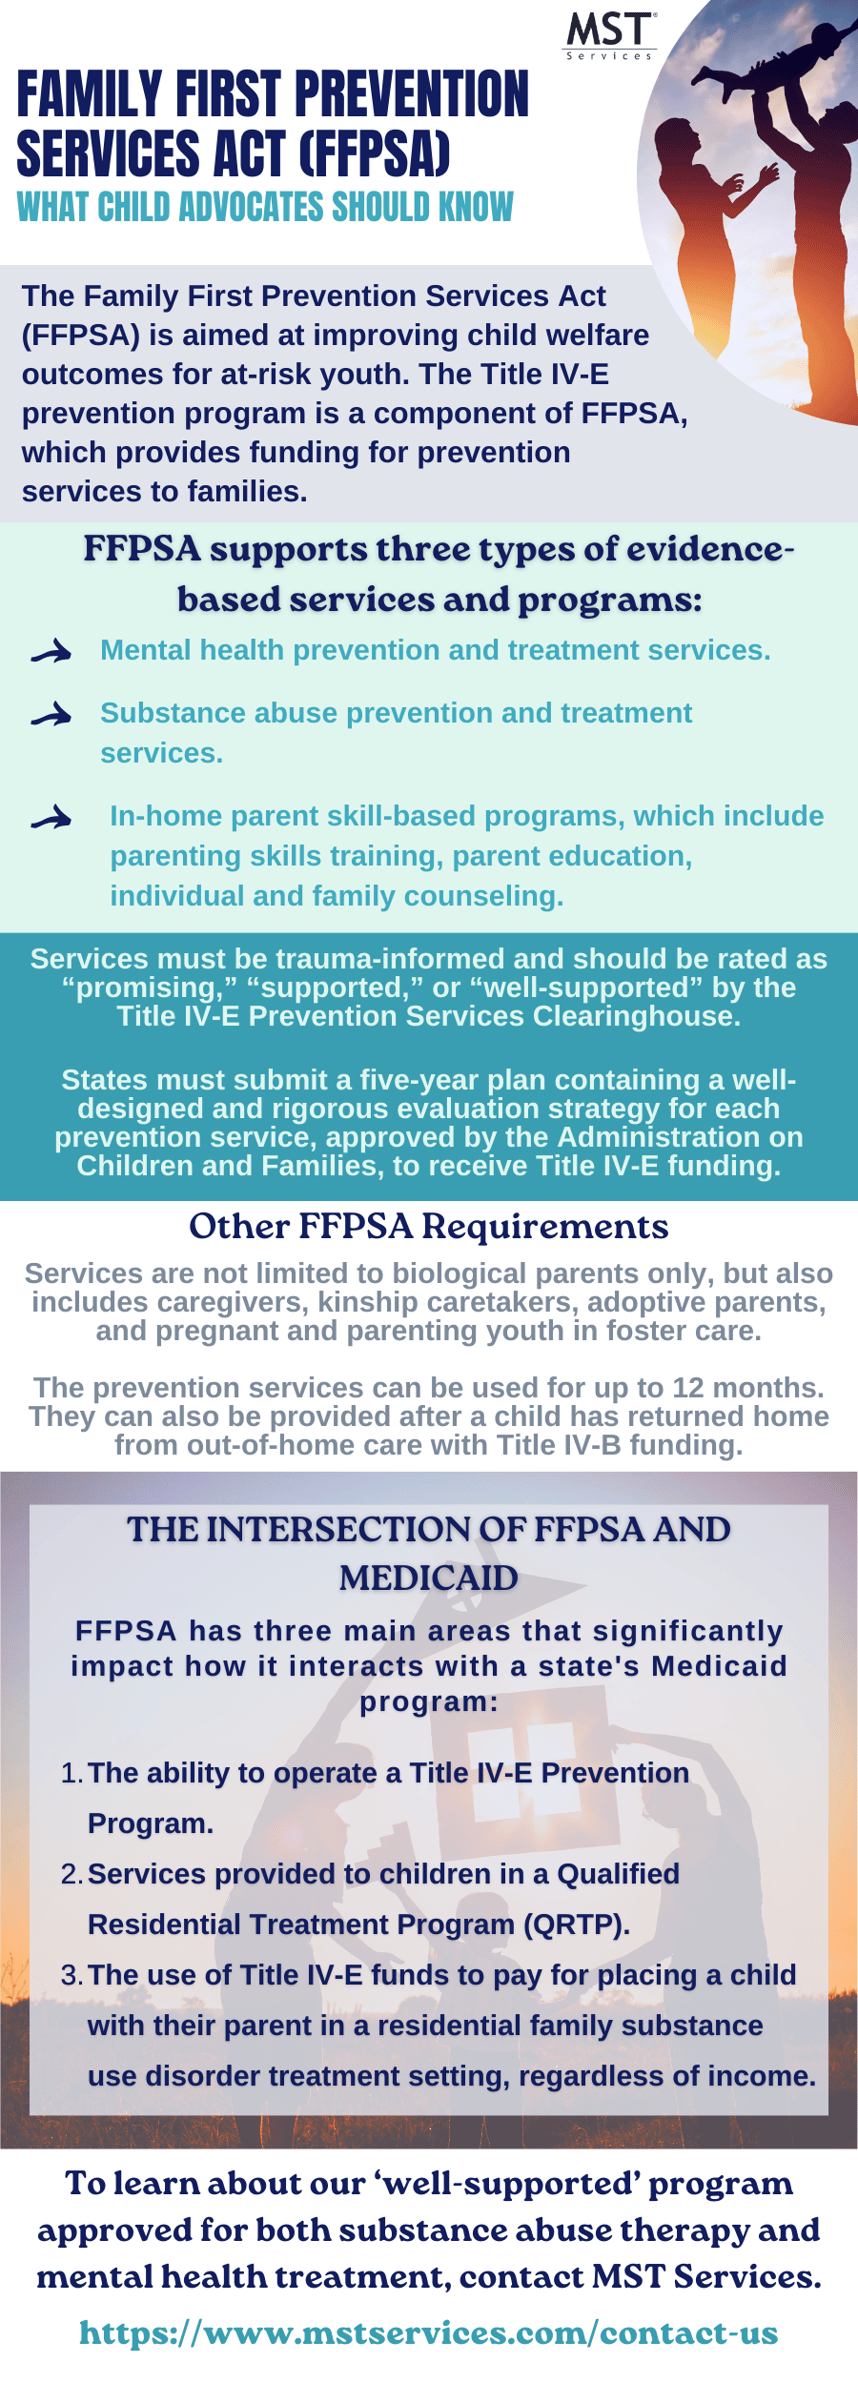 The Family First Prevention Services Act Key Facts